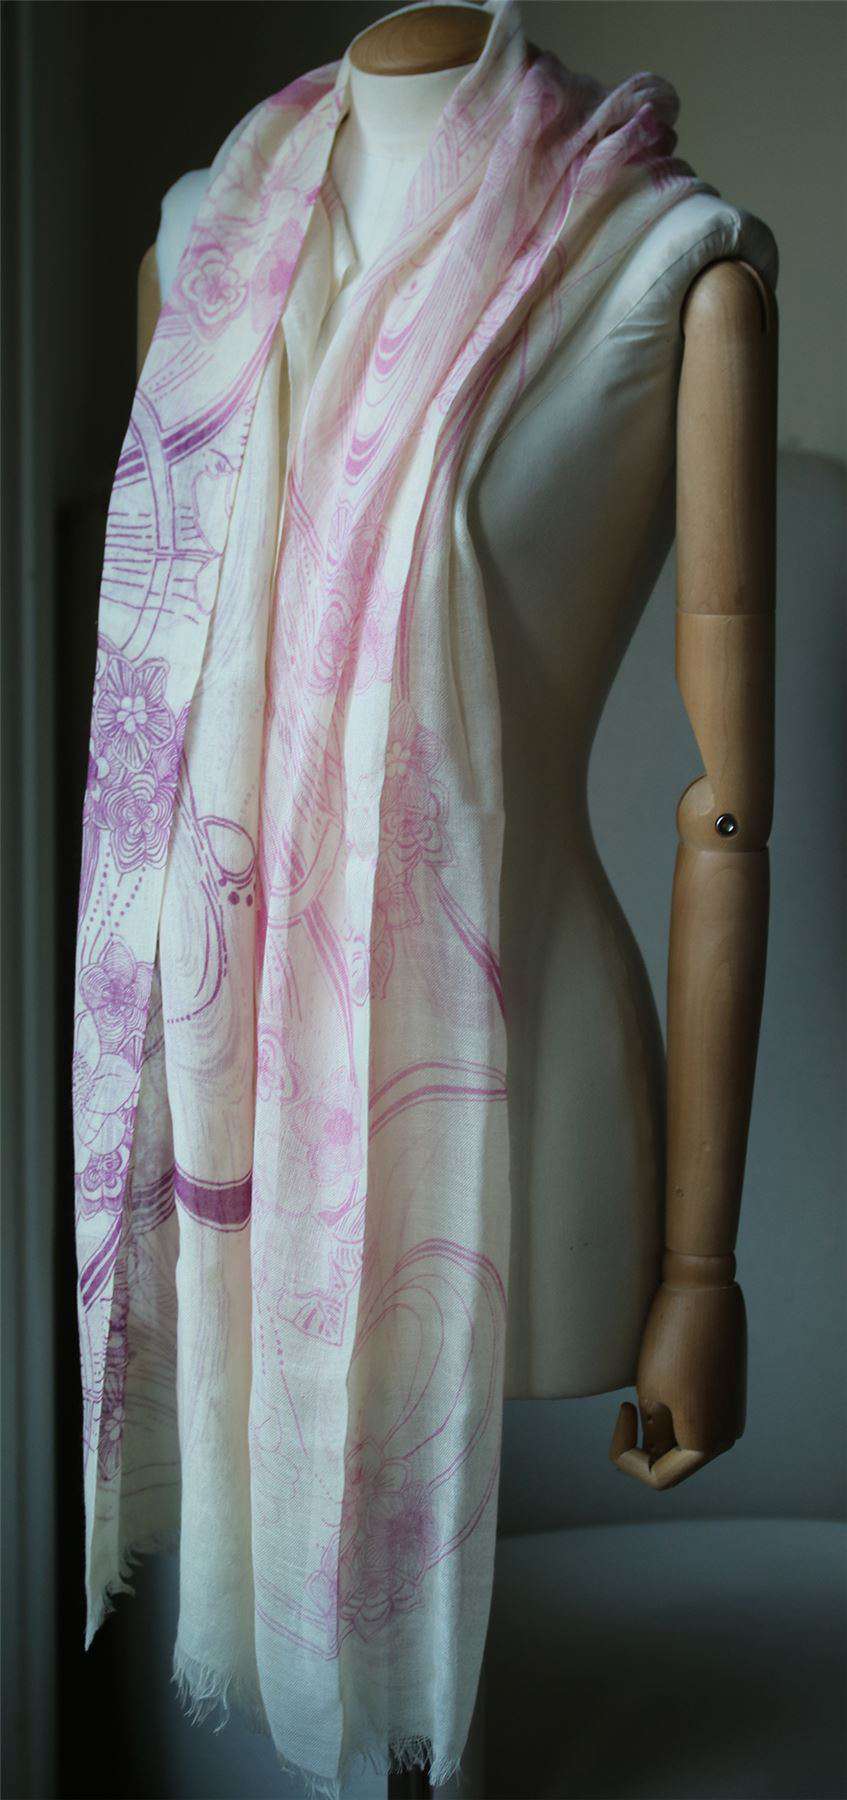 PASHMA SIGNATURE ABSTRACT PRINT SCARF